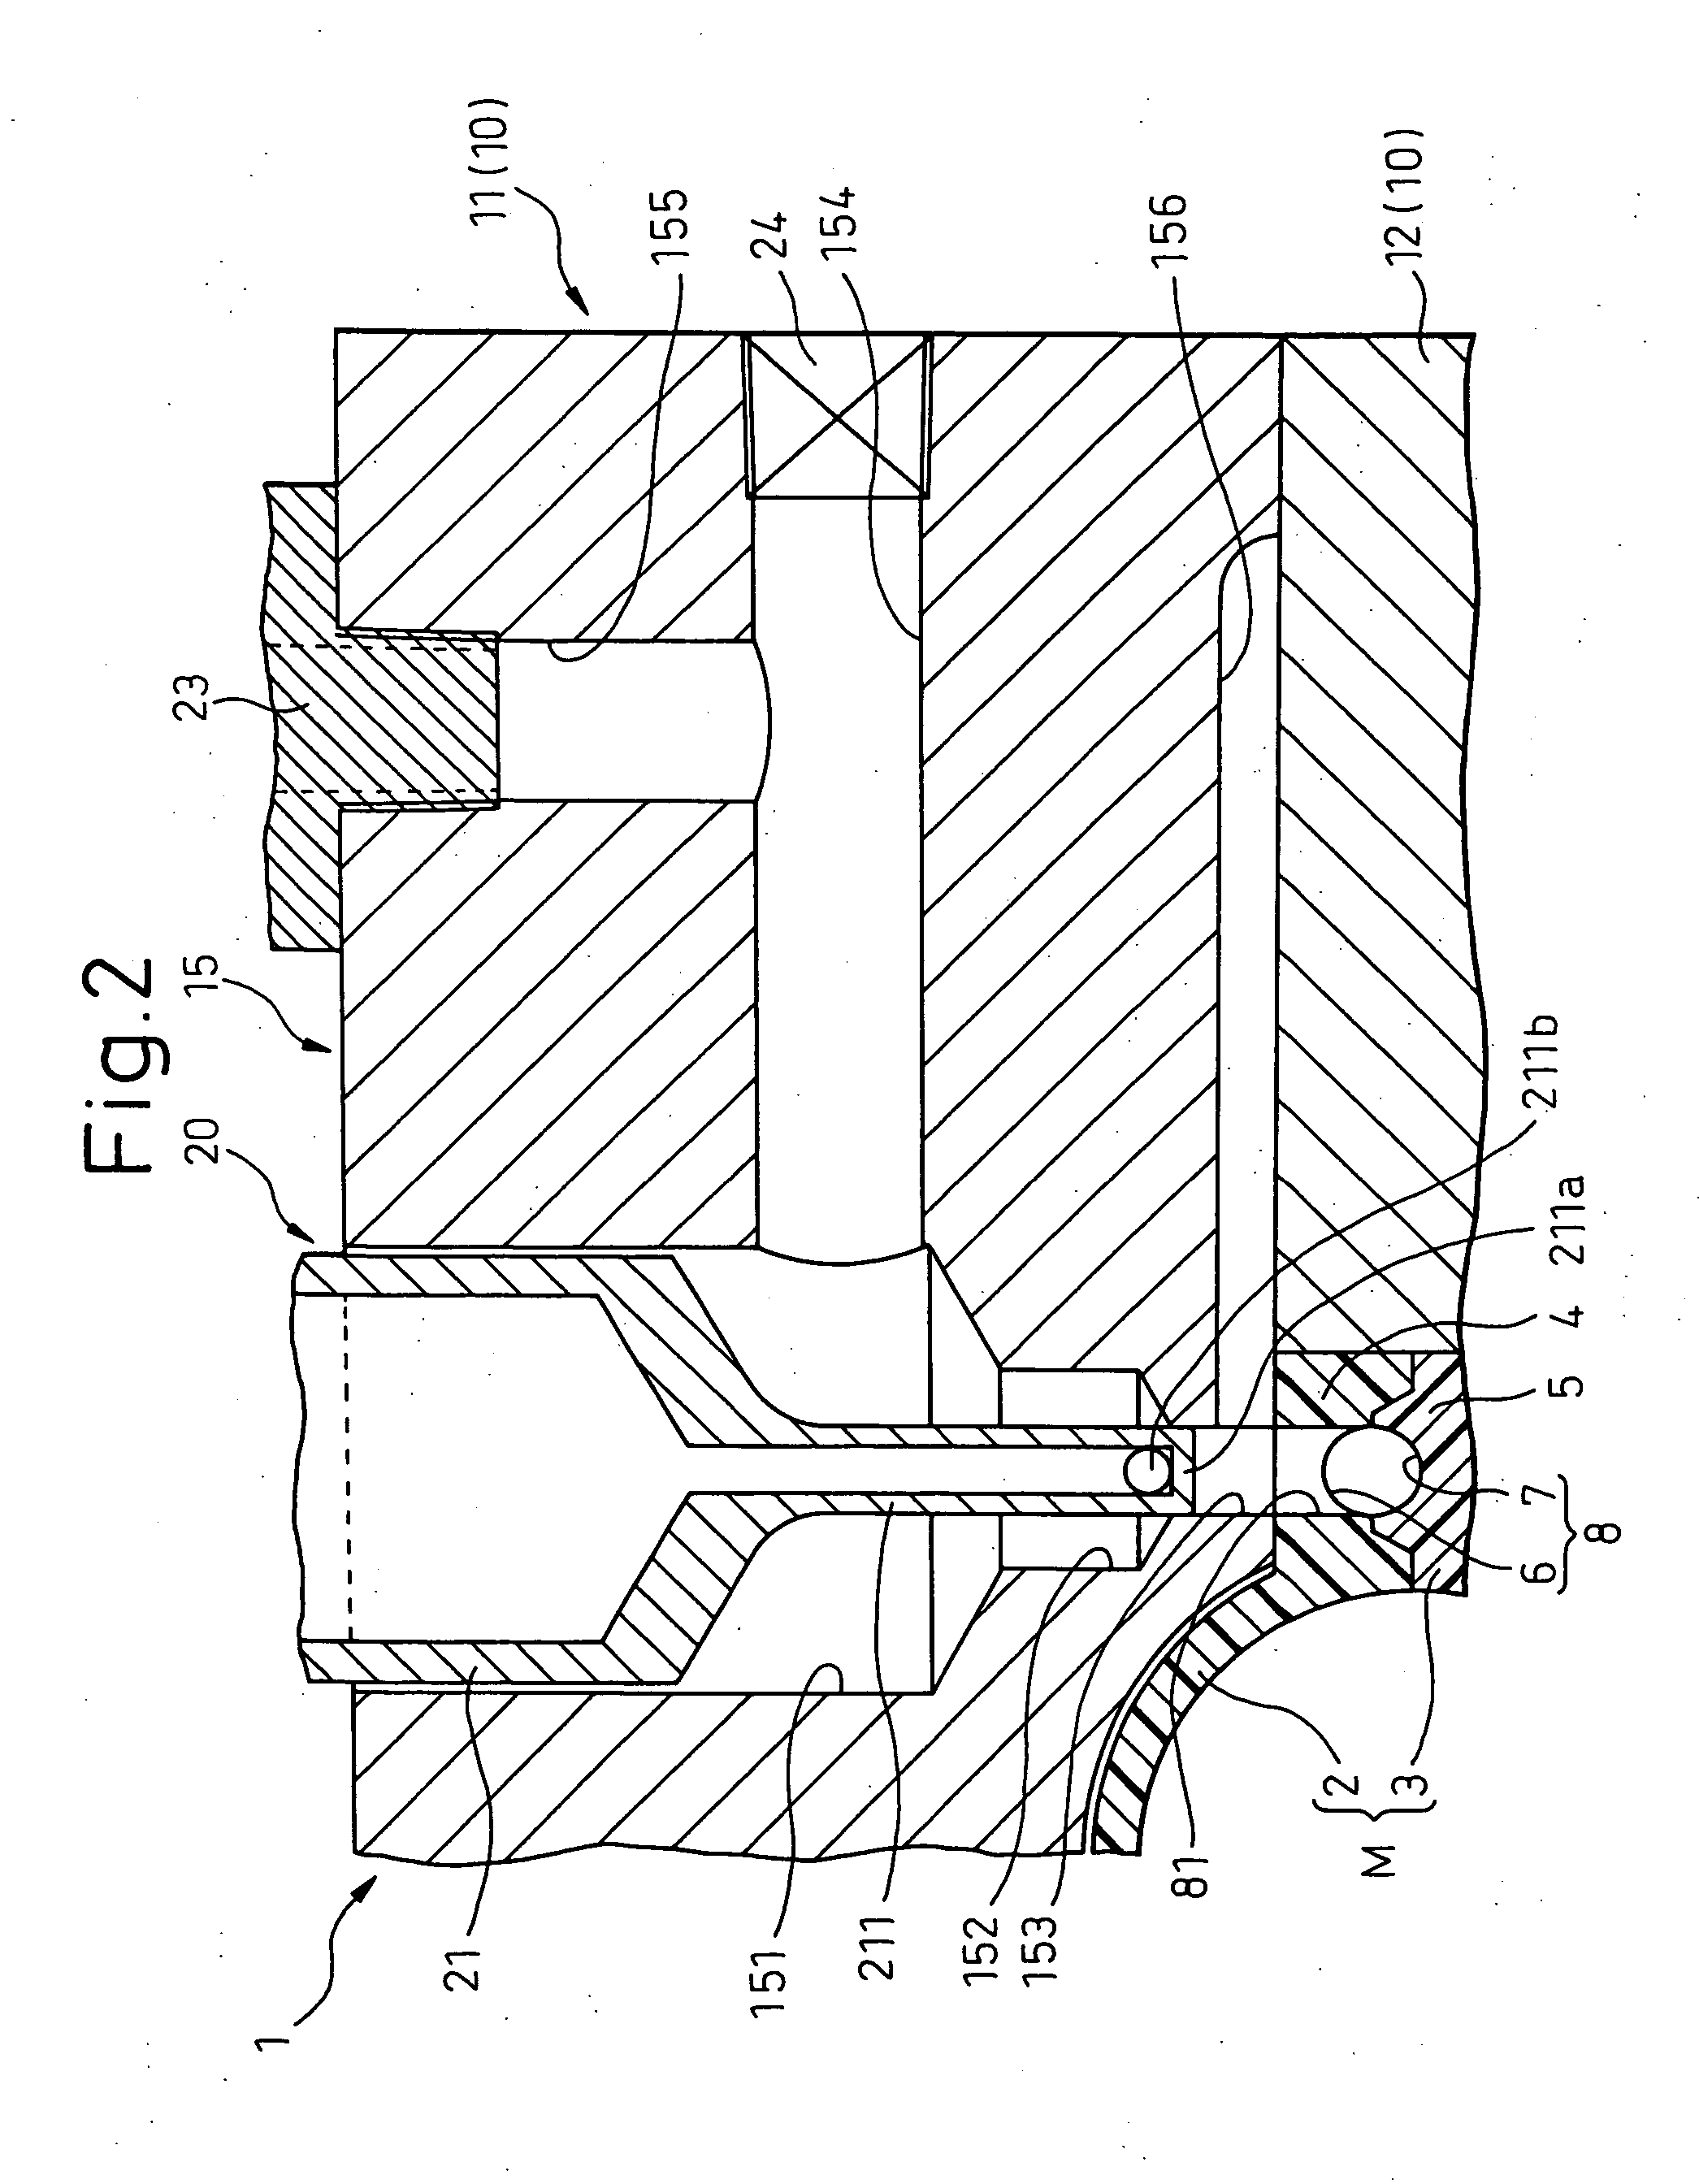 Heated medium supplying method and structure for secondary molding of resin molding component